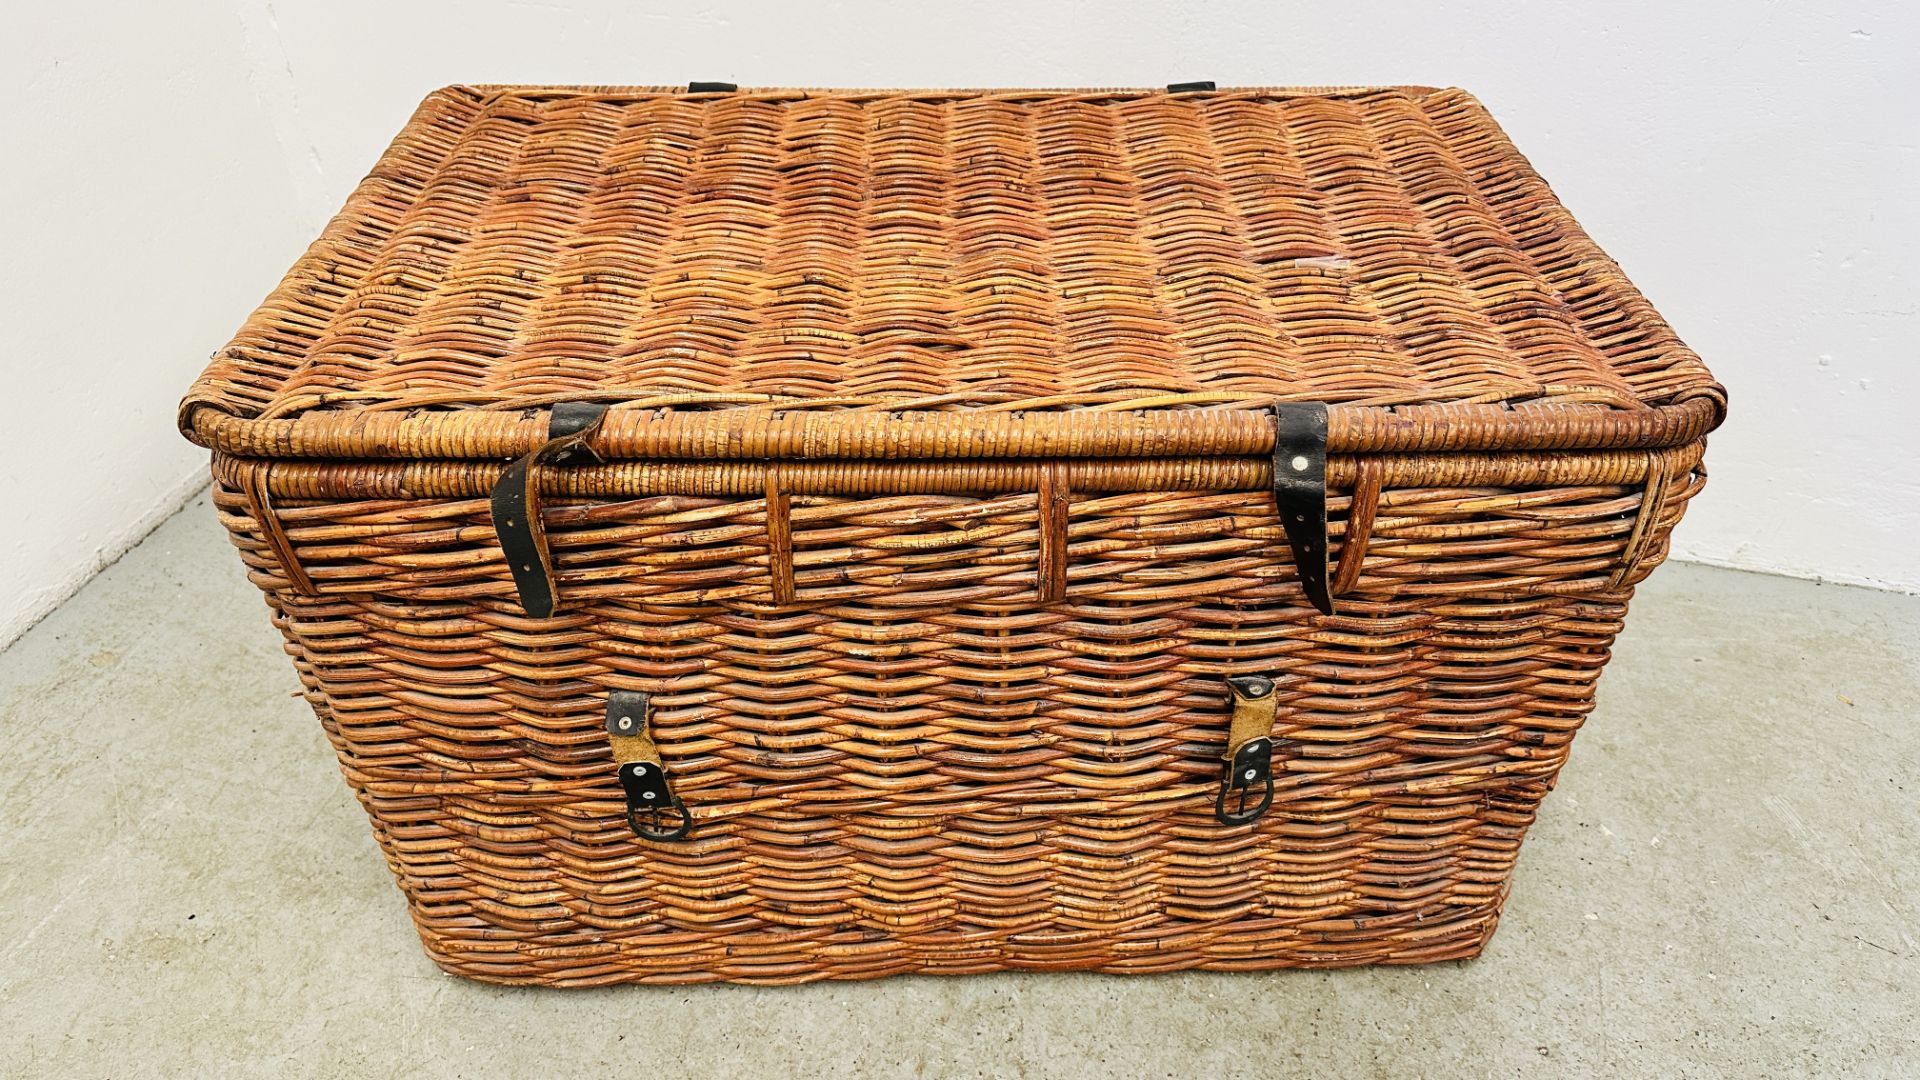 A LARGE WICKER TWO HANDLED BASKET - W 90 X D 55 X H 55CM.